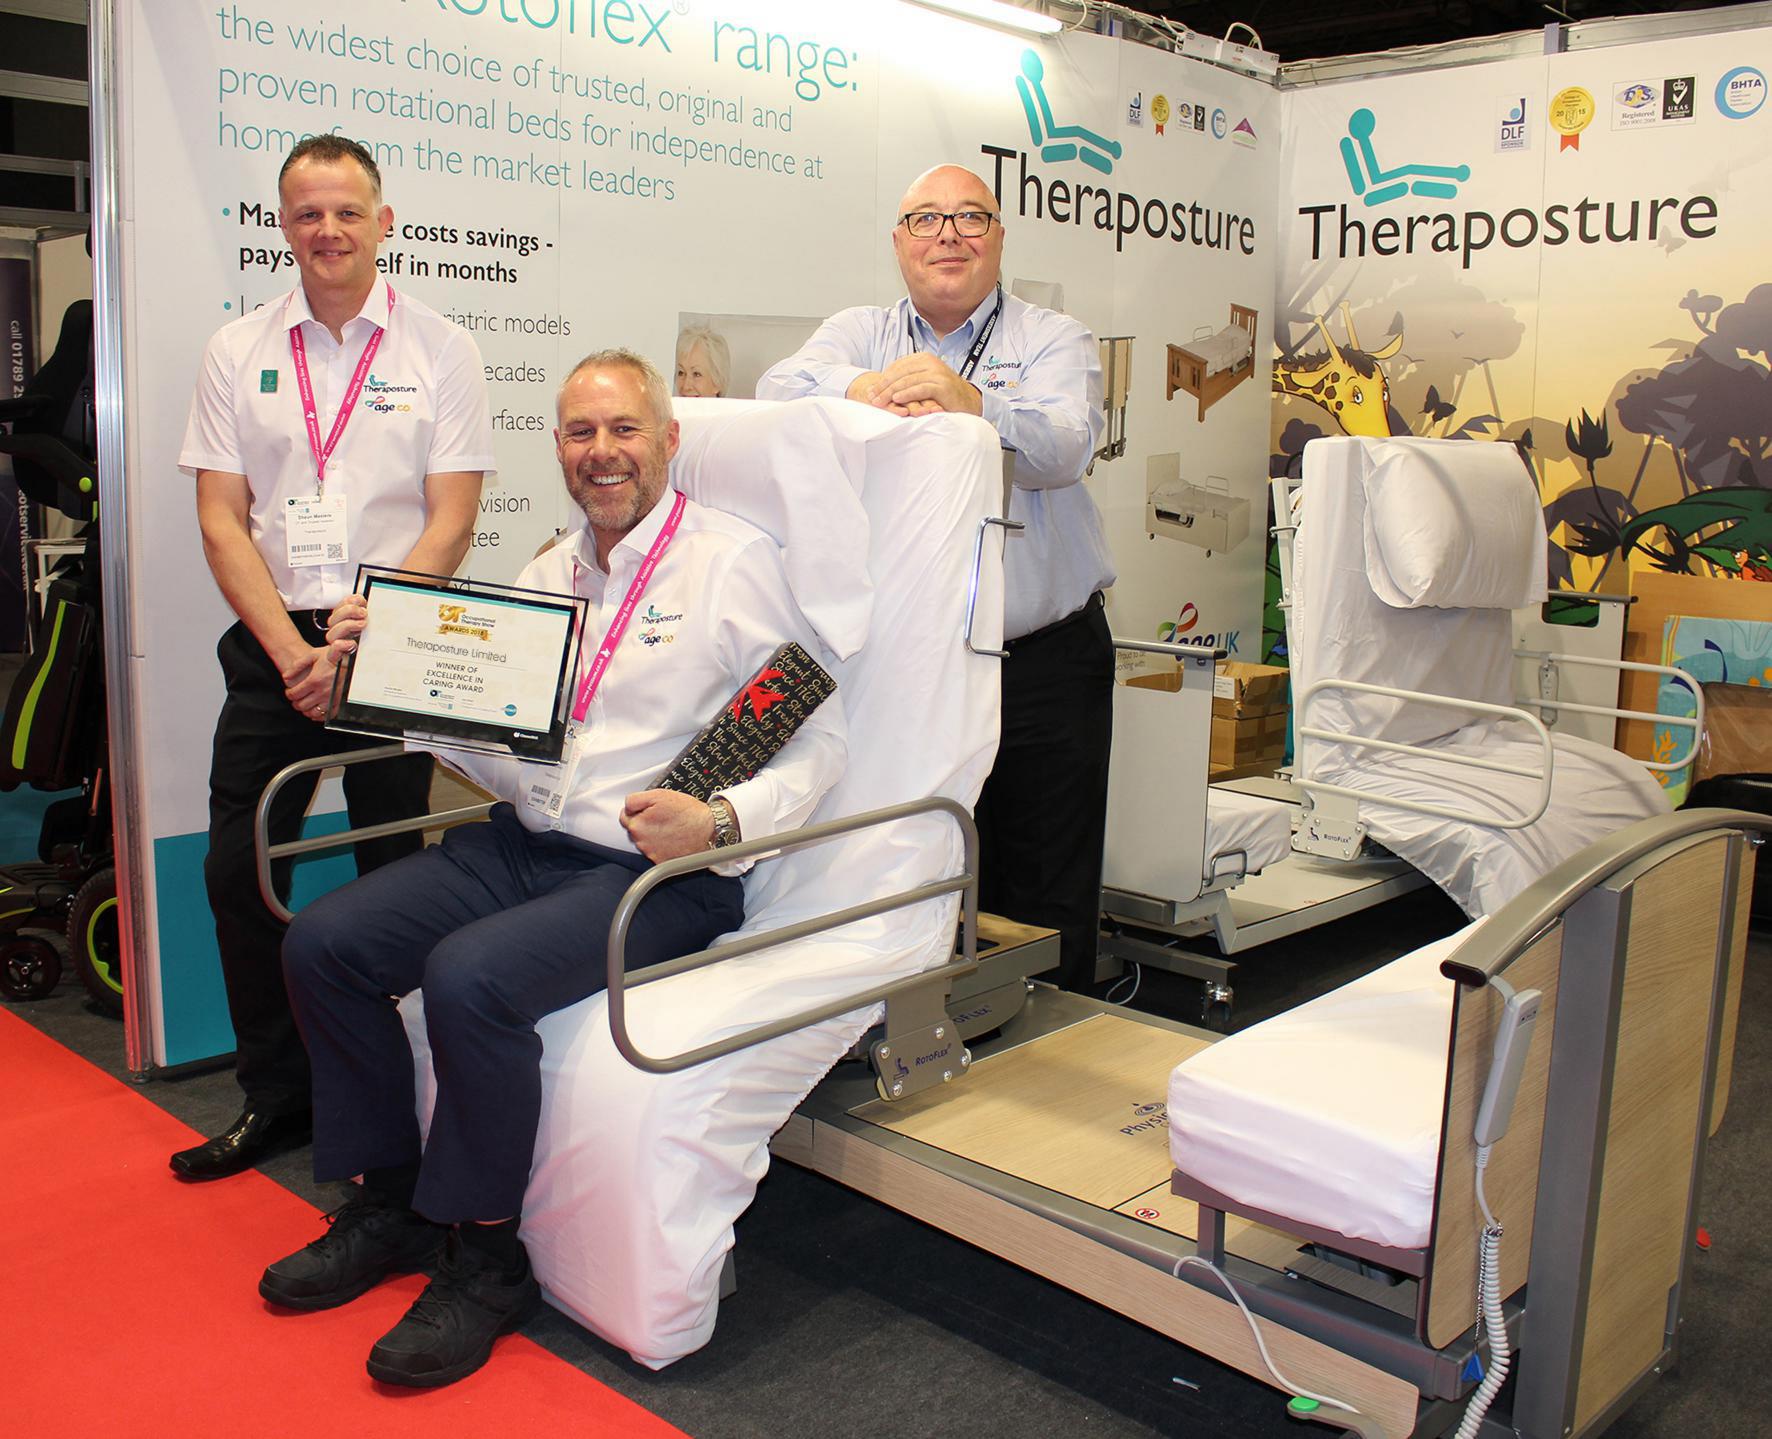 Theraposture Rotoflex 235 Plus Bed wins inaugural OT Show Award for Excellence in Caring